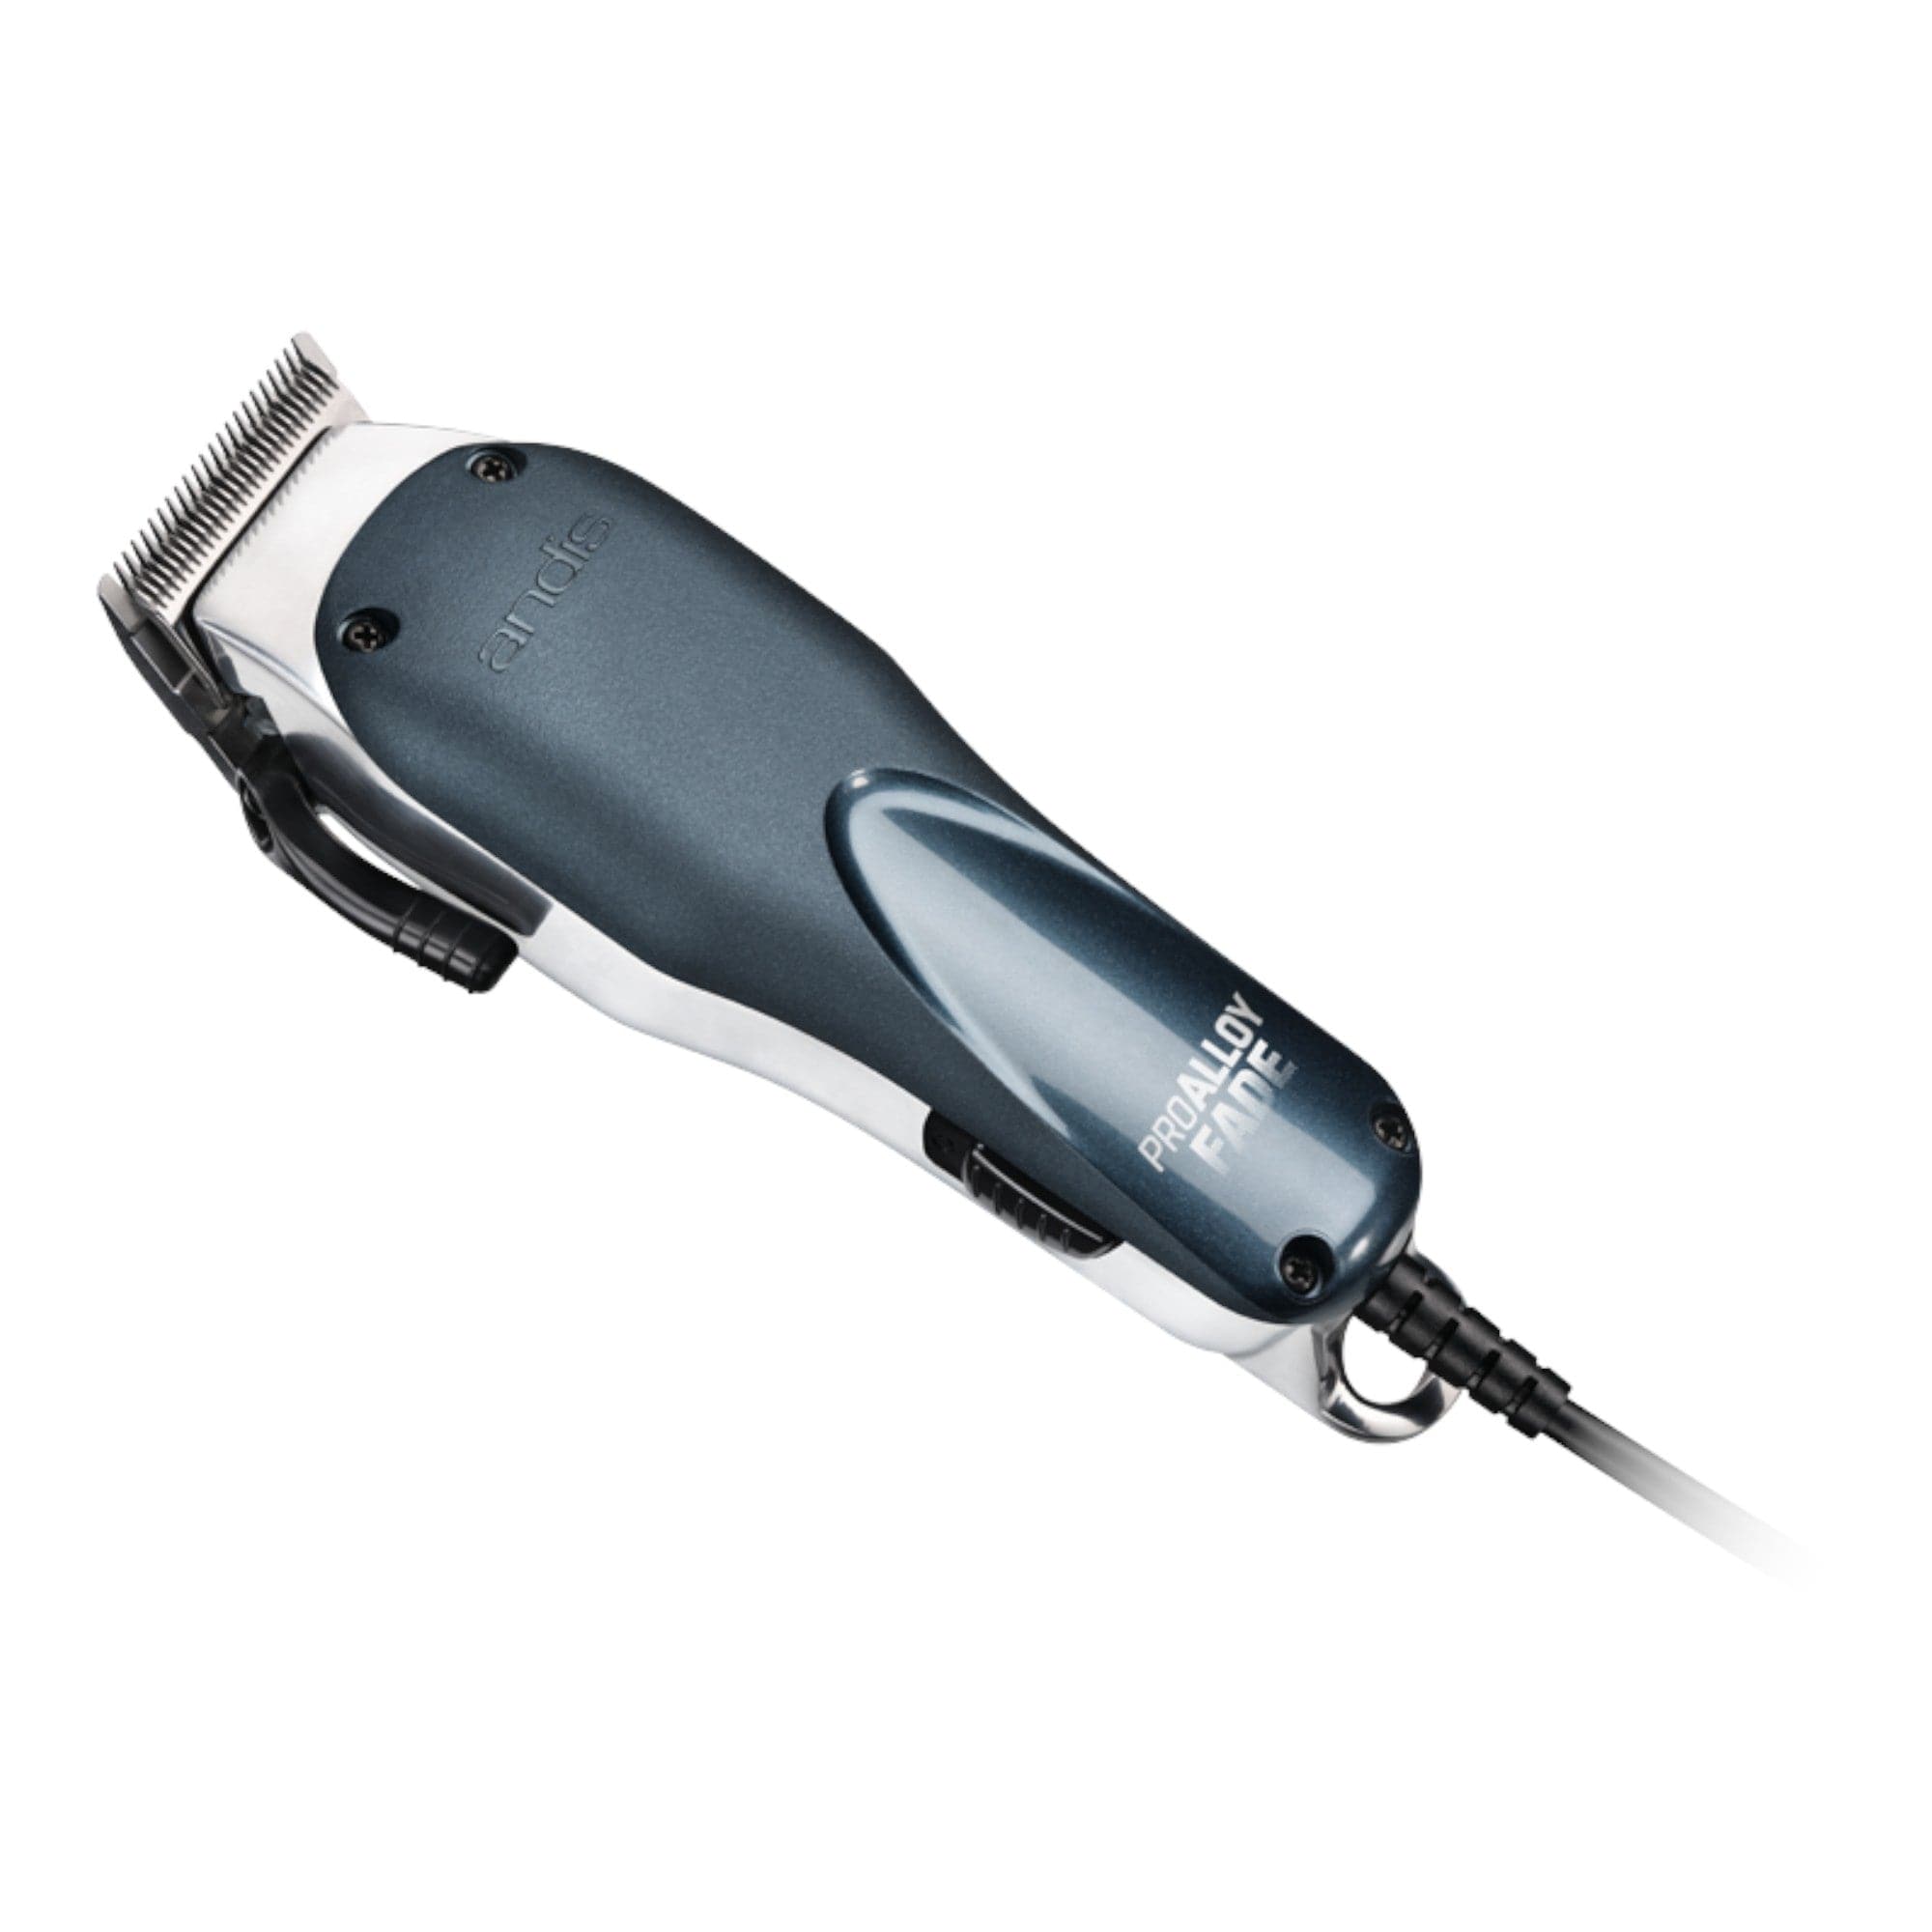 Andis - ProAlloy Fade Adjustable Blade Clipper AAC-1 6910